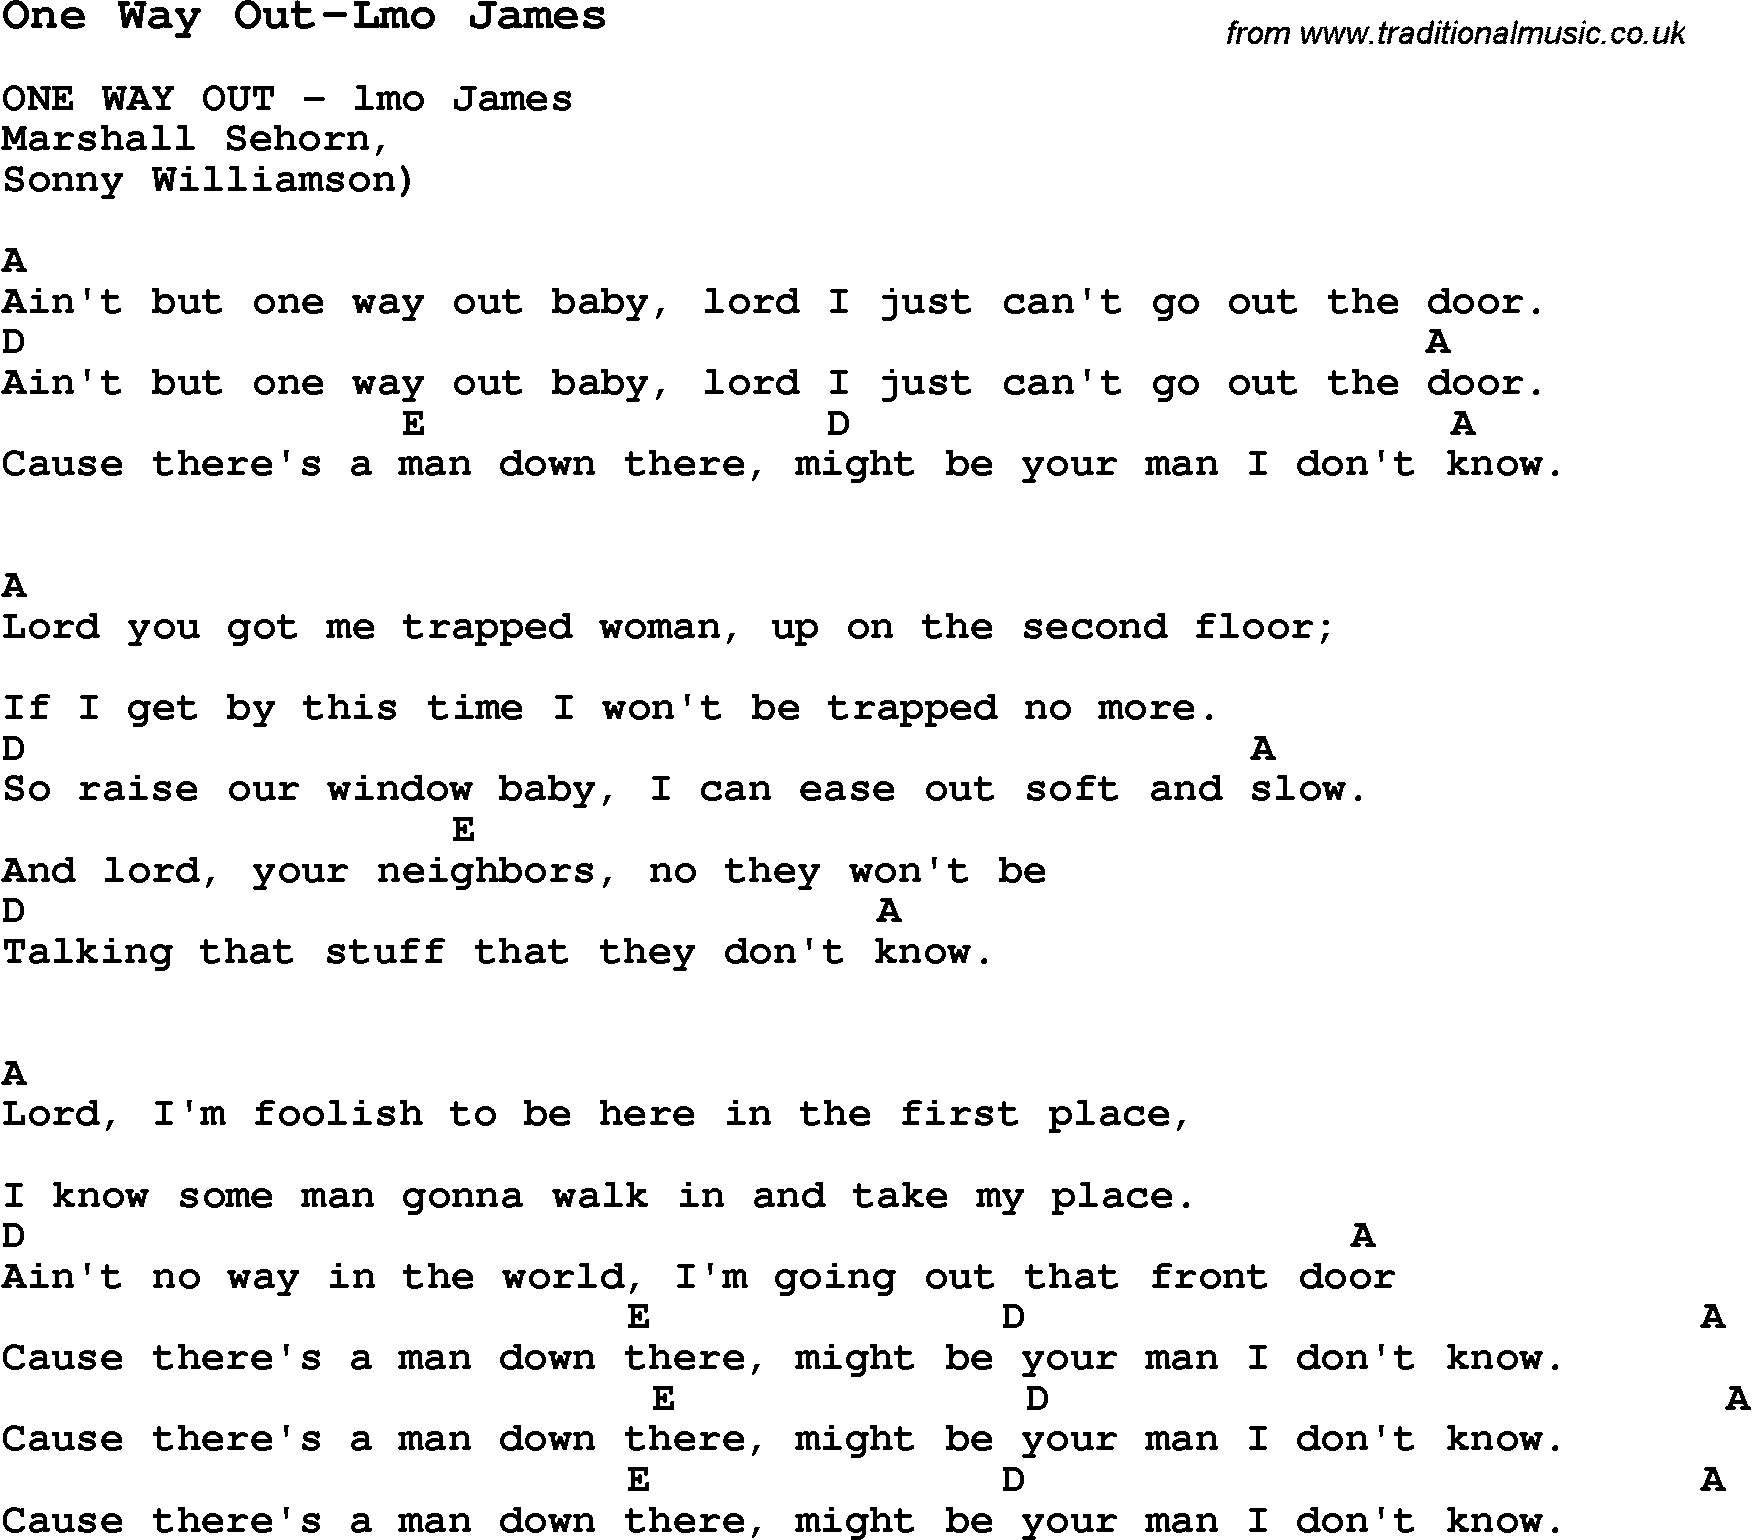 Blues Guitar Song, lyrics, chords, tablature, playing hints for One Way Out-Lmo James